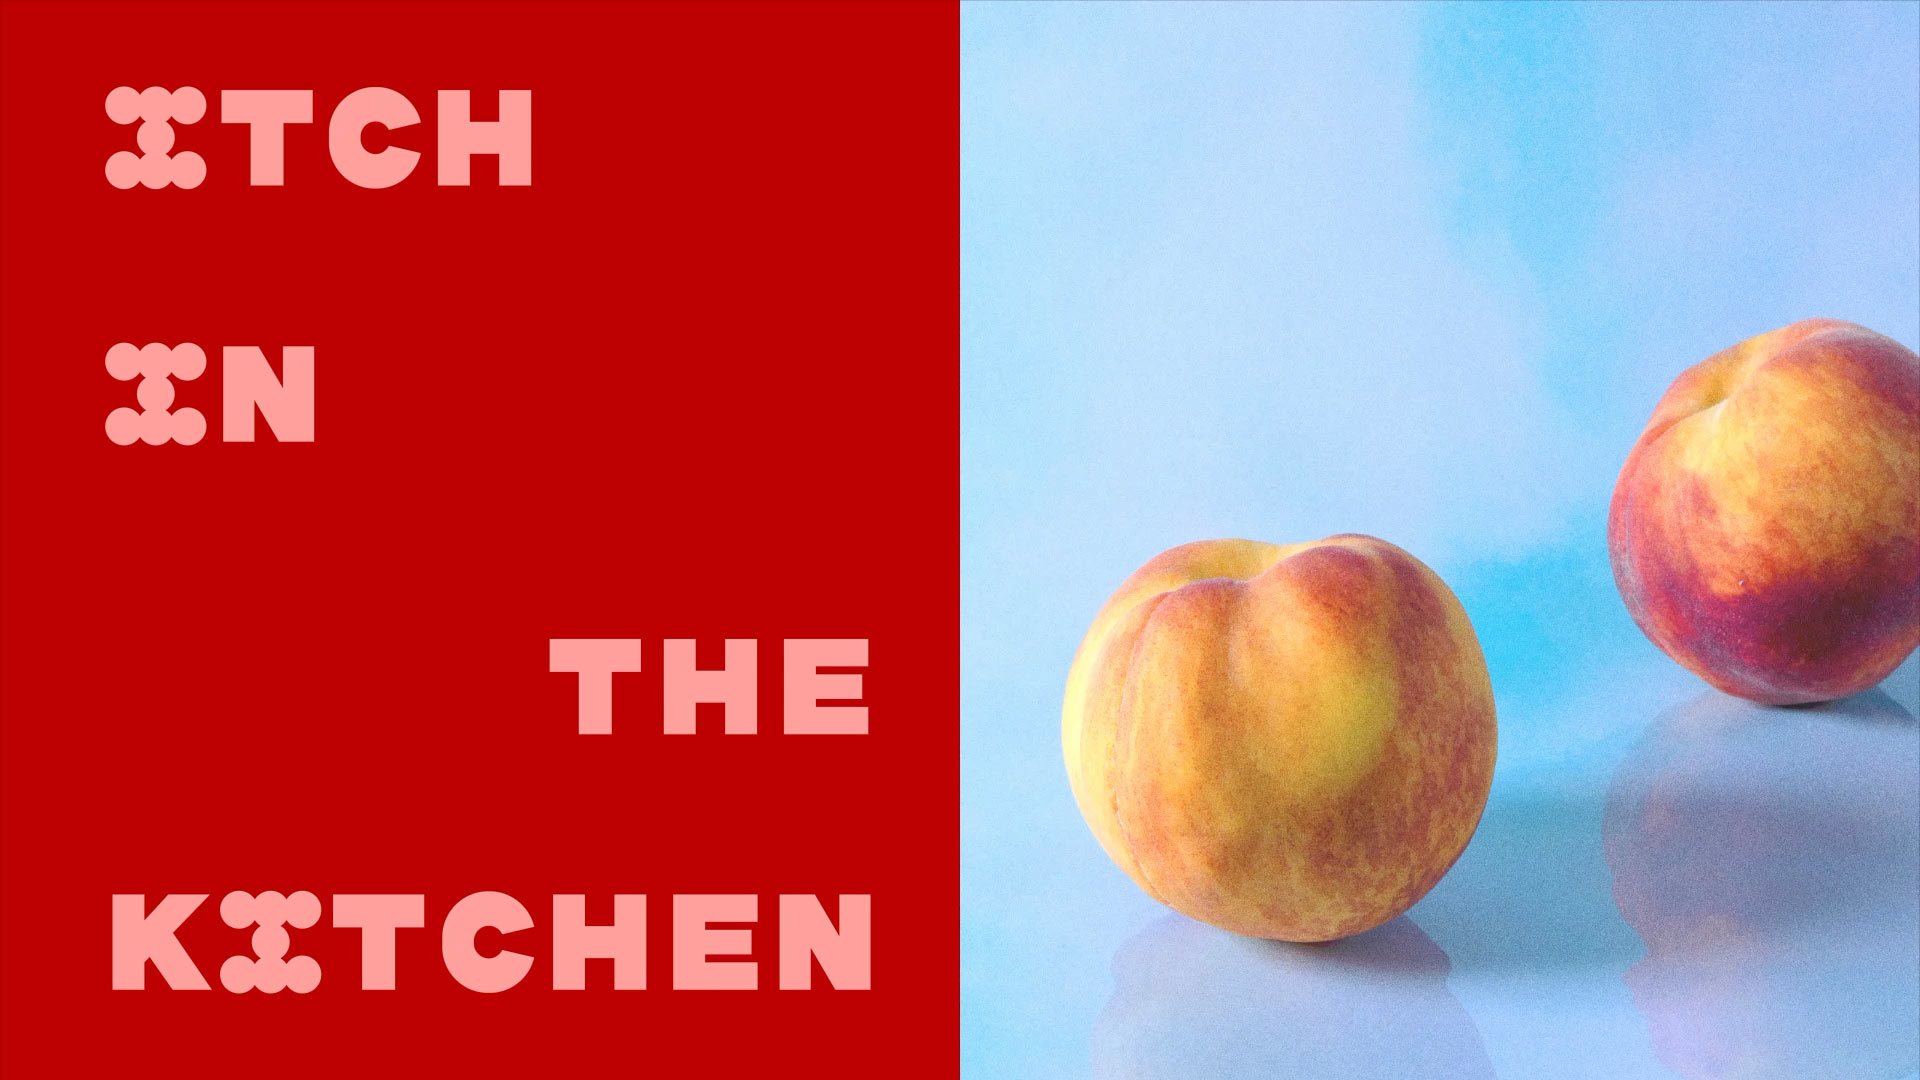 Itch in the Kitchen logo and an image of two peaches